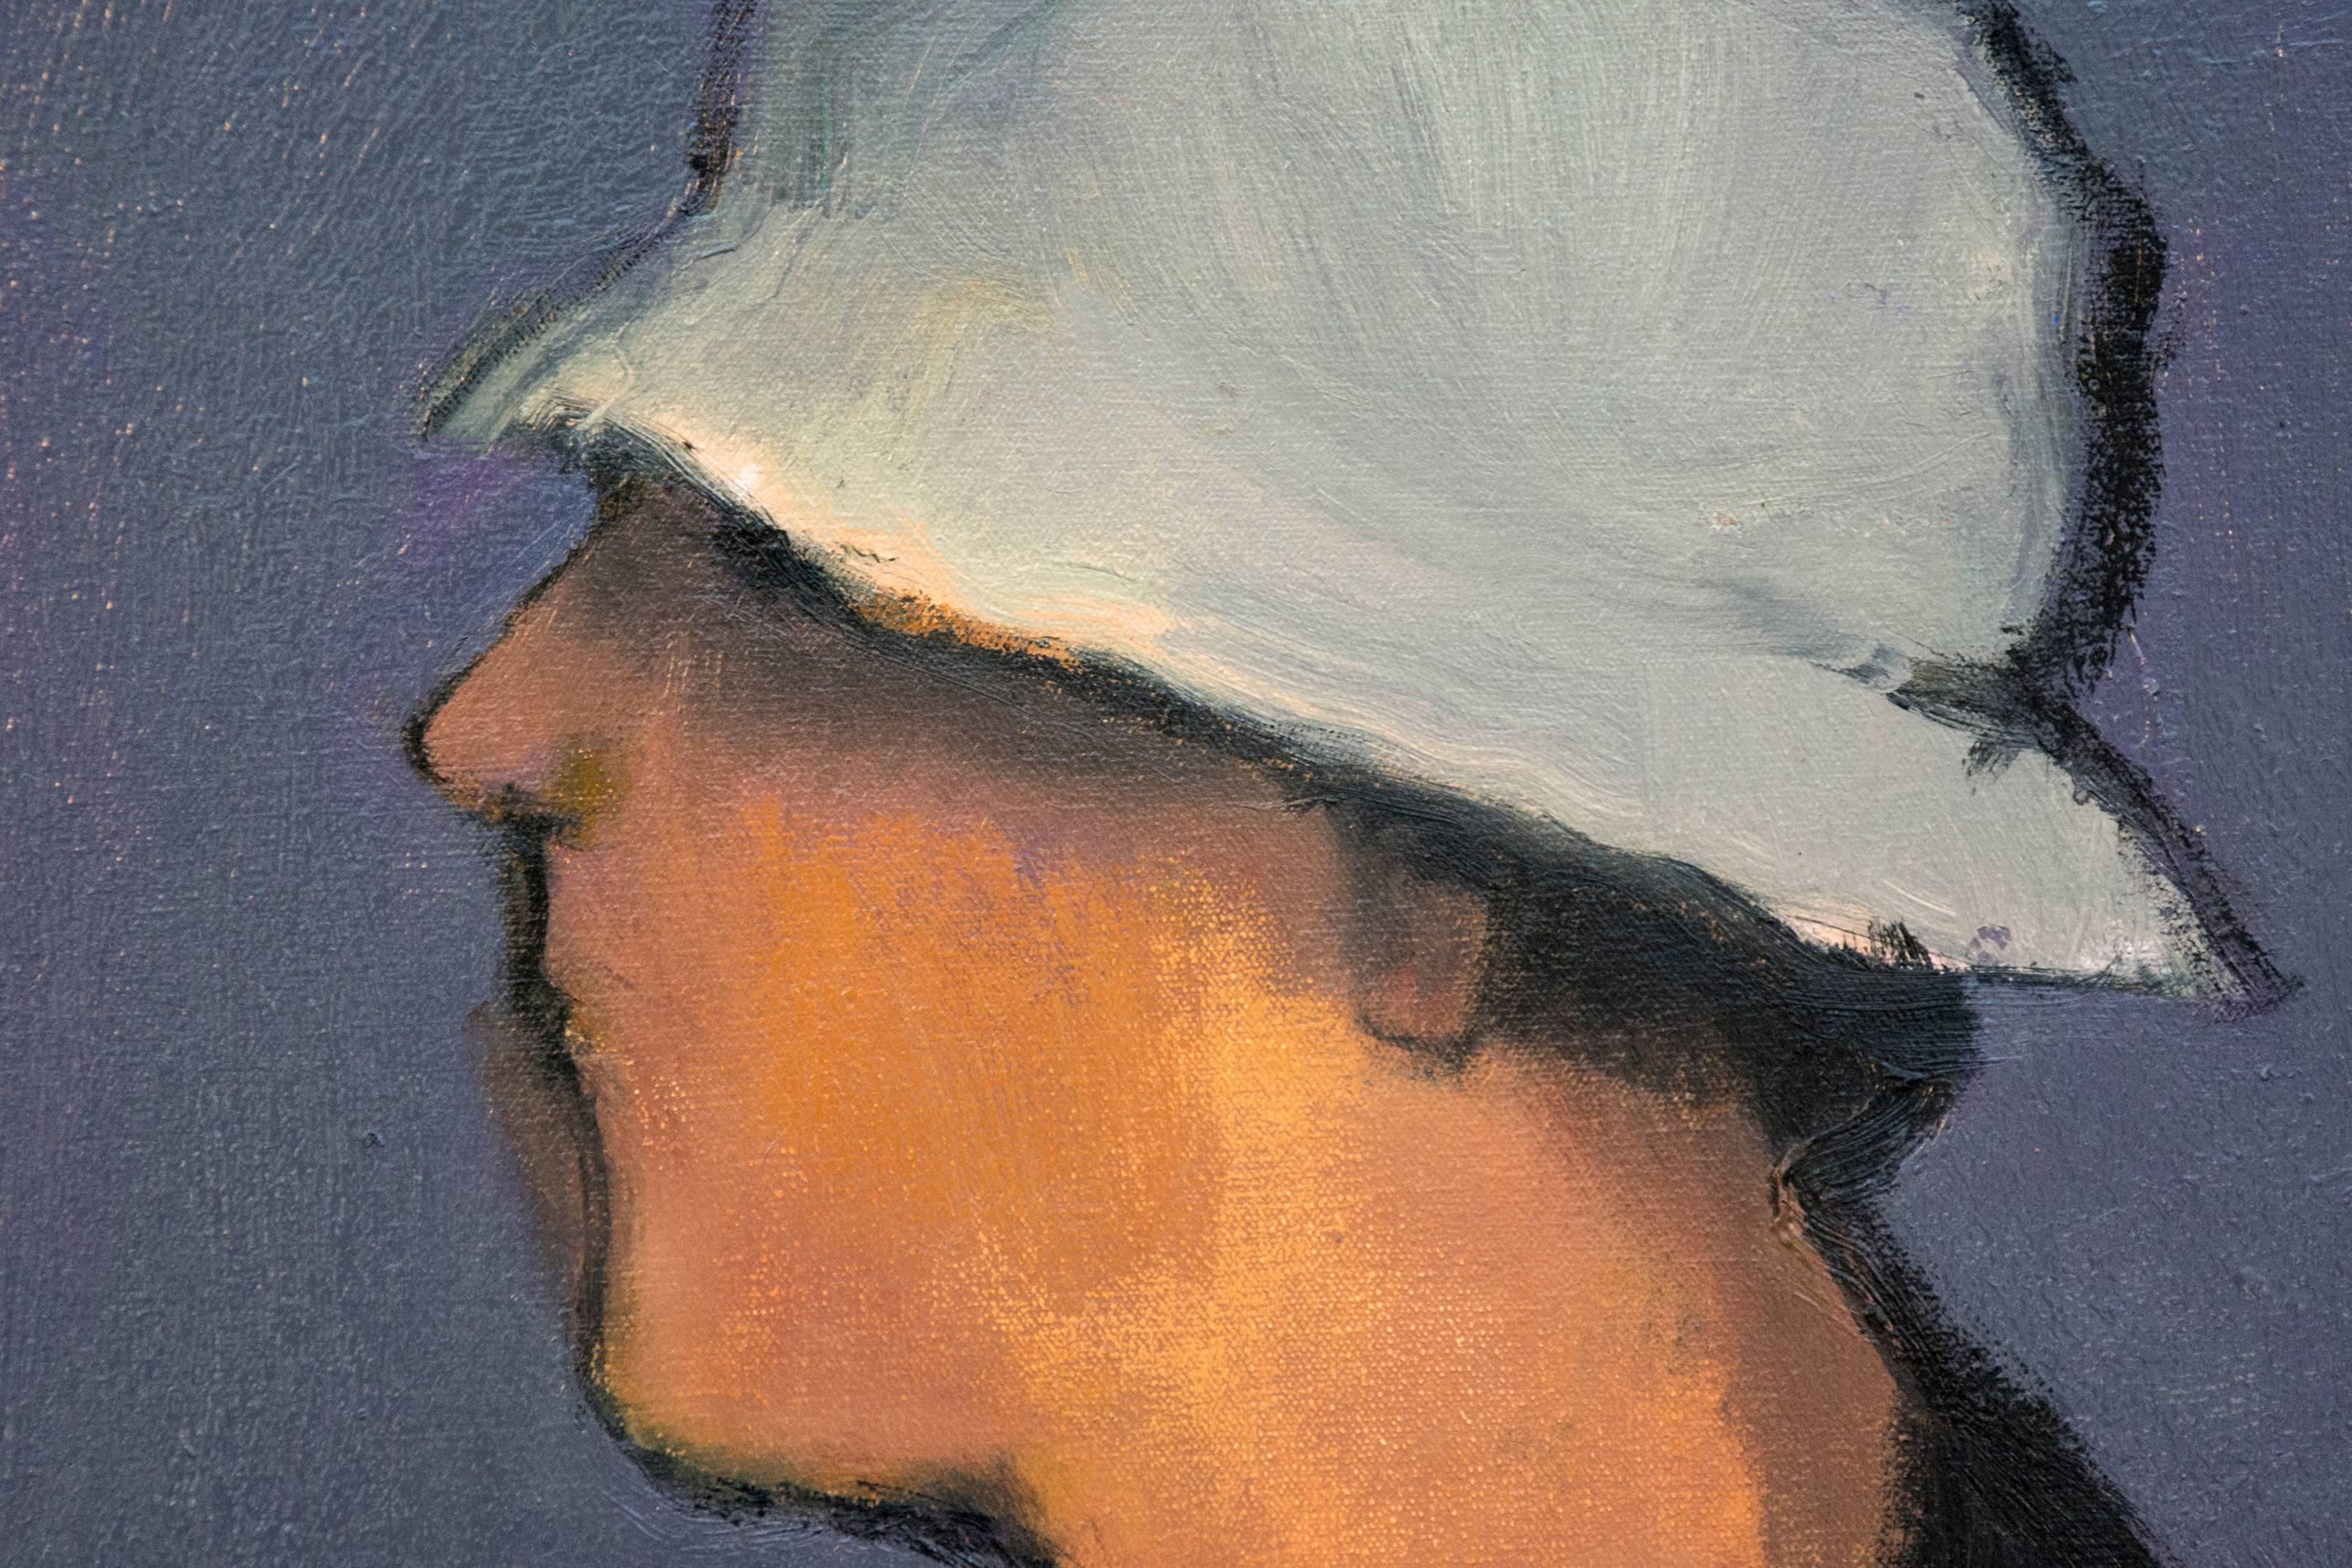 Using layers of thick, expressive brushwork, solid colors and slightly flattened space, Jennifer Hornyak has created an elegant portrait of a man in black shirt and white sun hat. The simple, modern forms outlined in black on an indigo ground